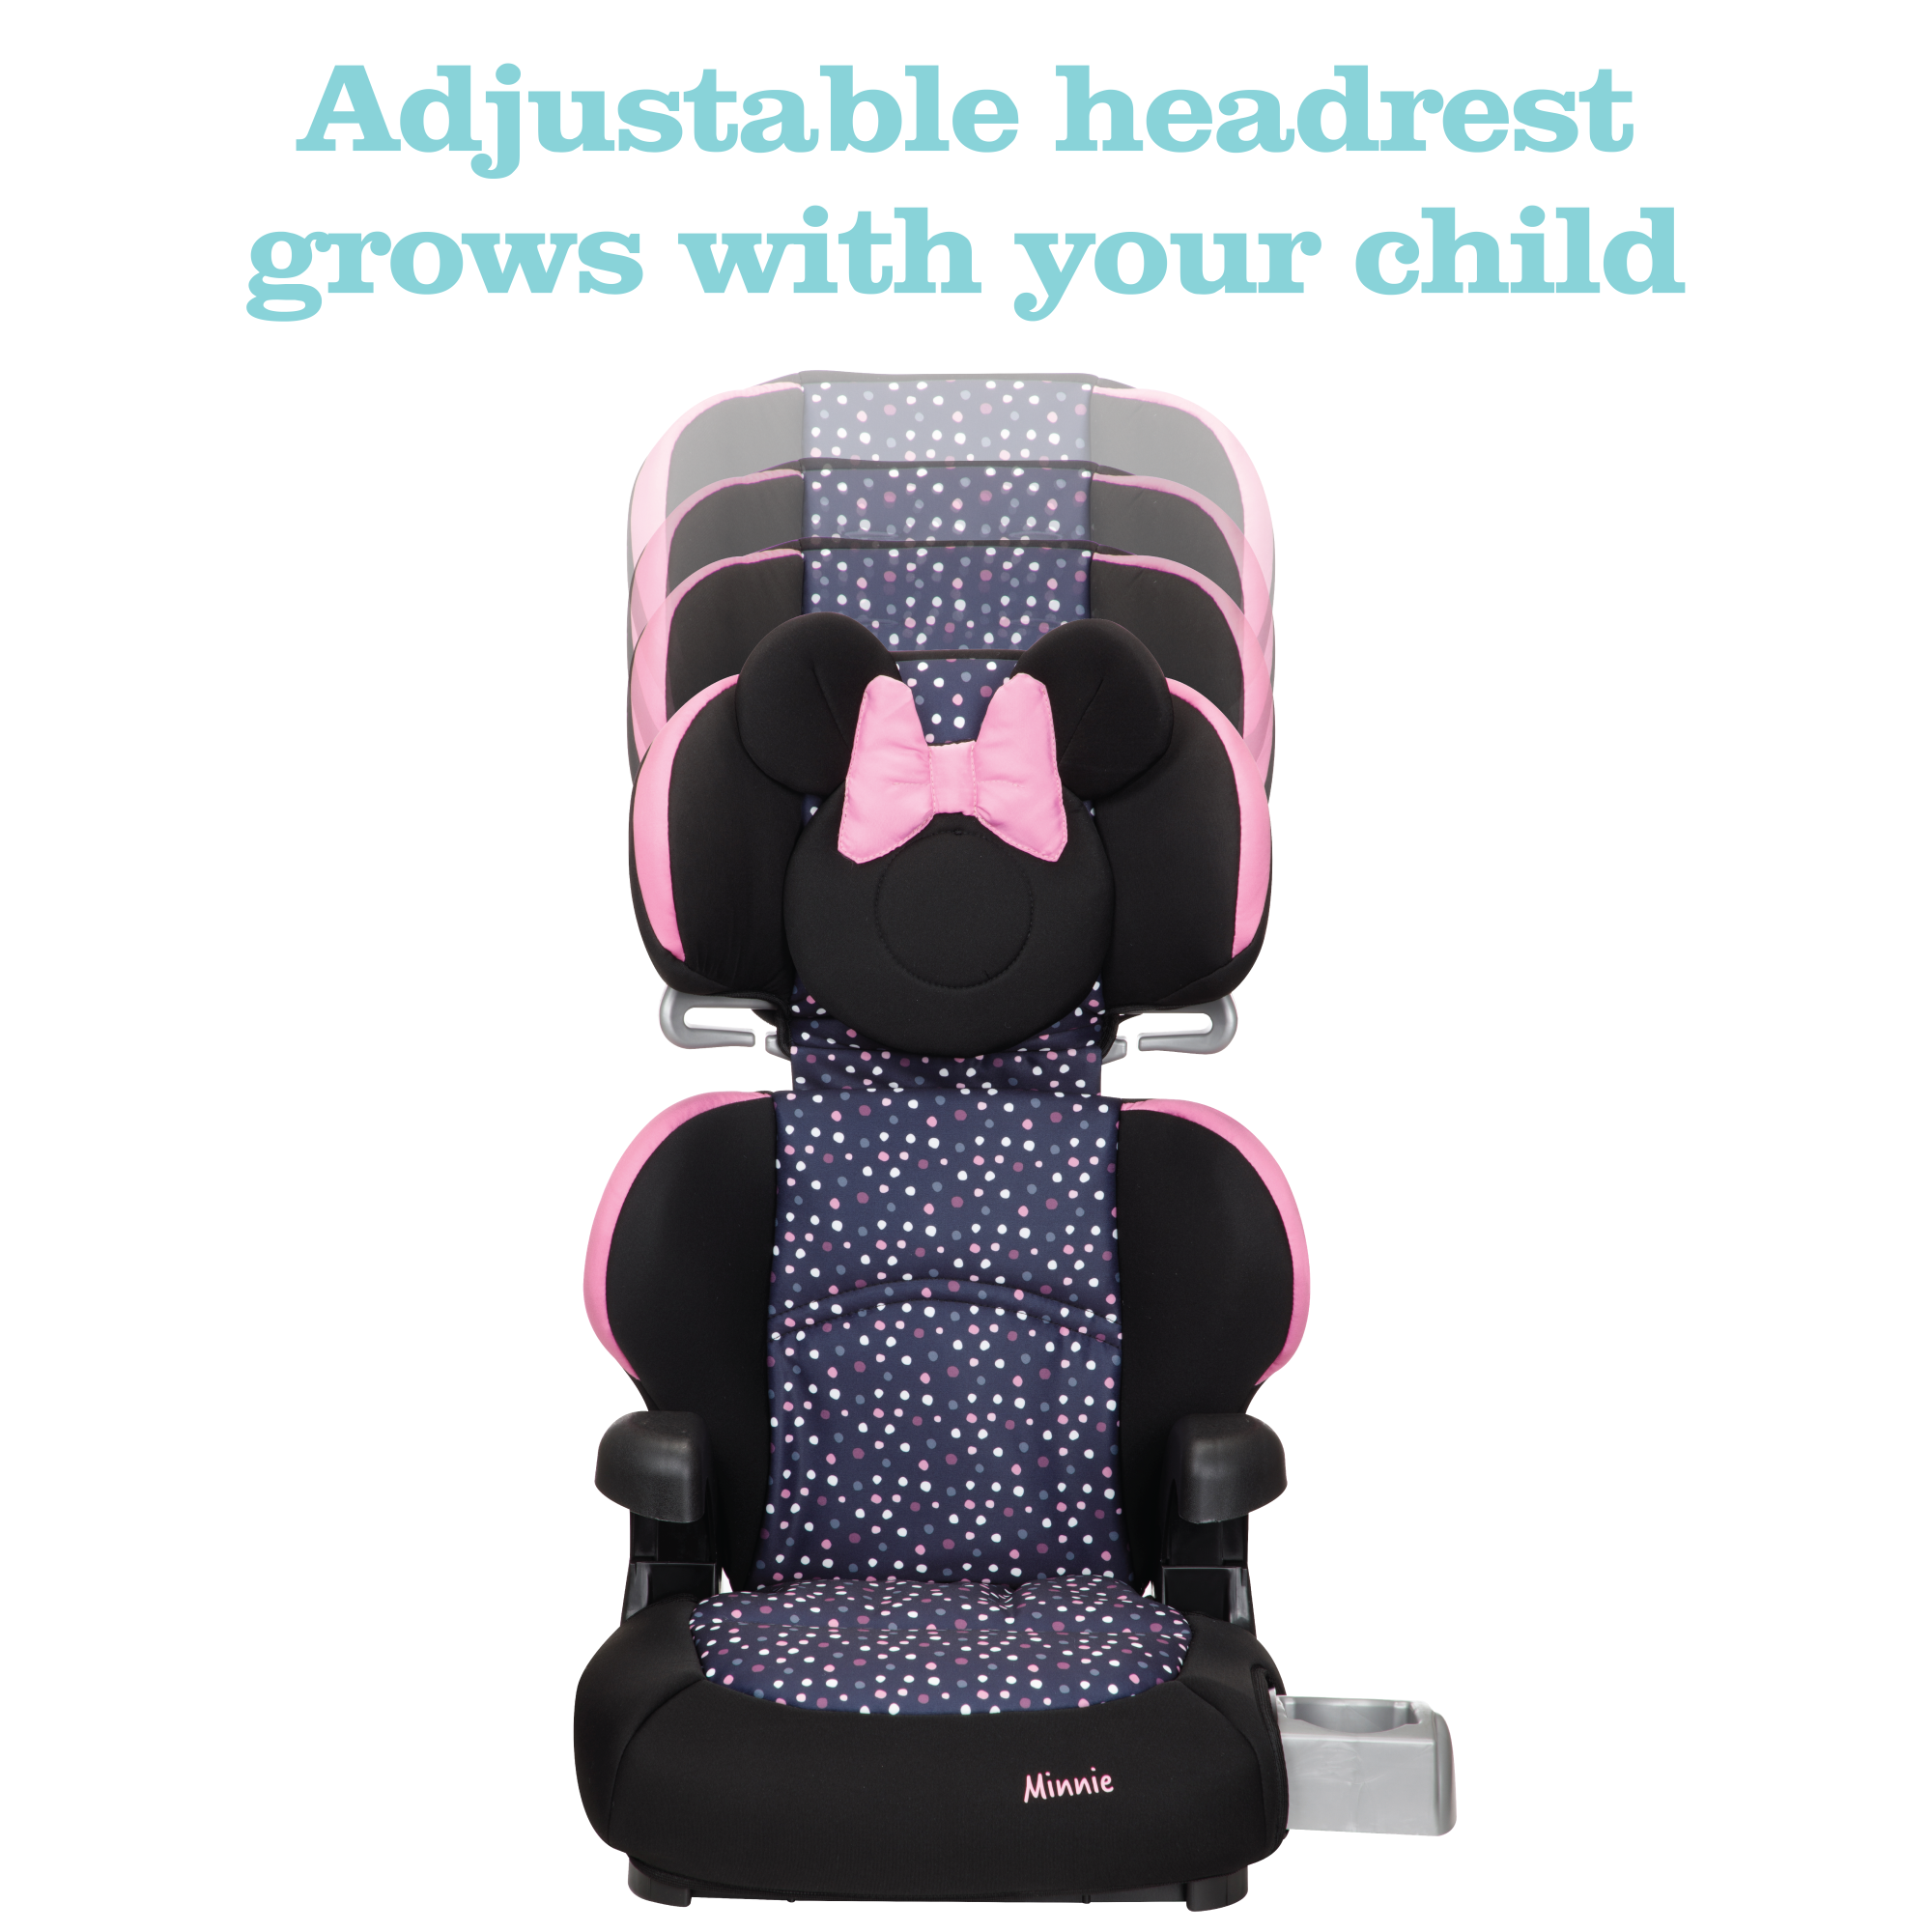 Disney Baby Pronto!™ Belt-Positioning Booster Car Seat - Mickey Blogger - 45 degree angle view of left side